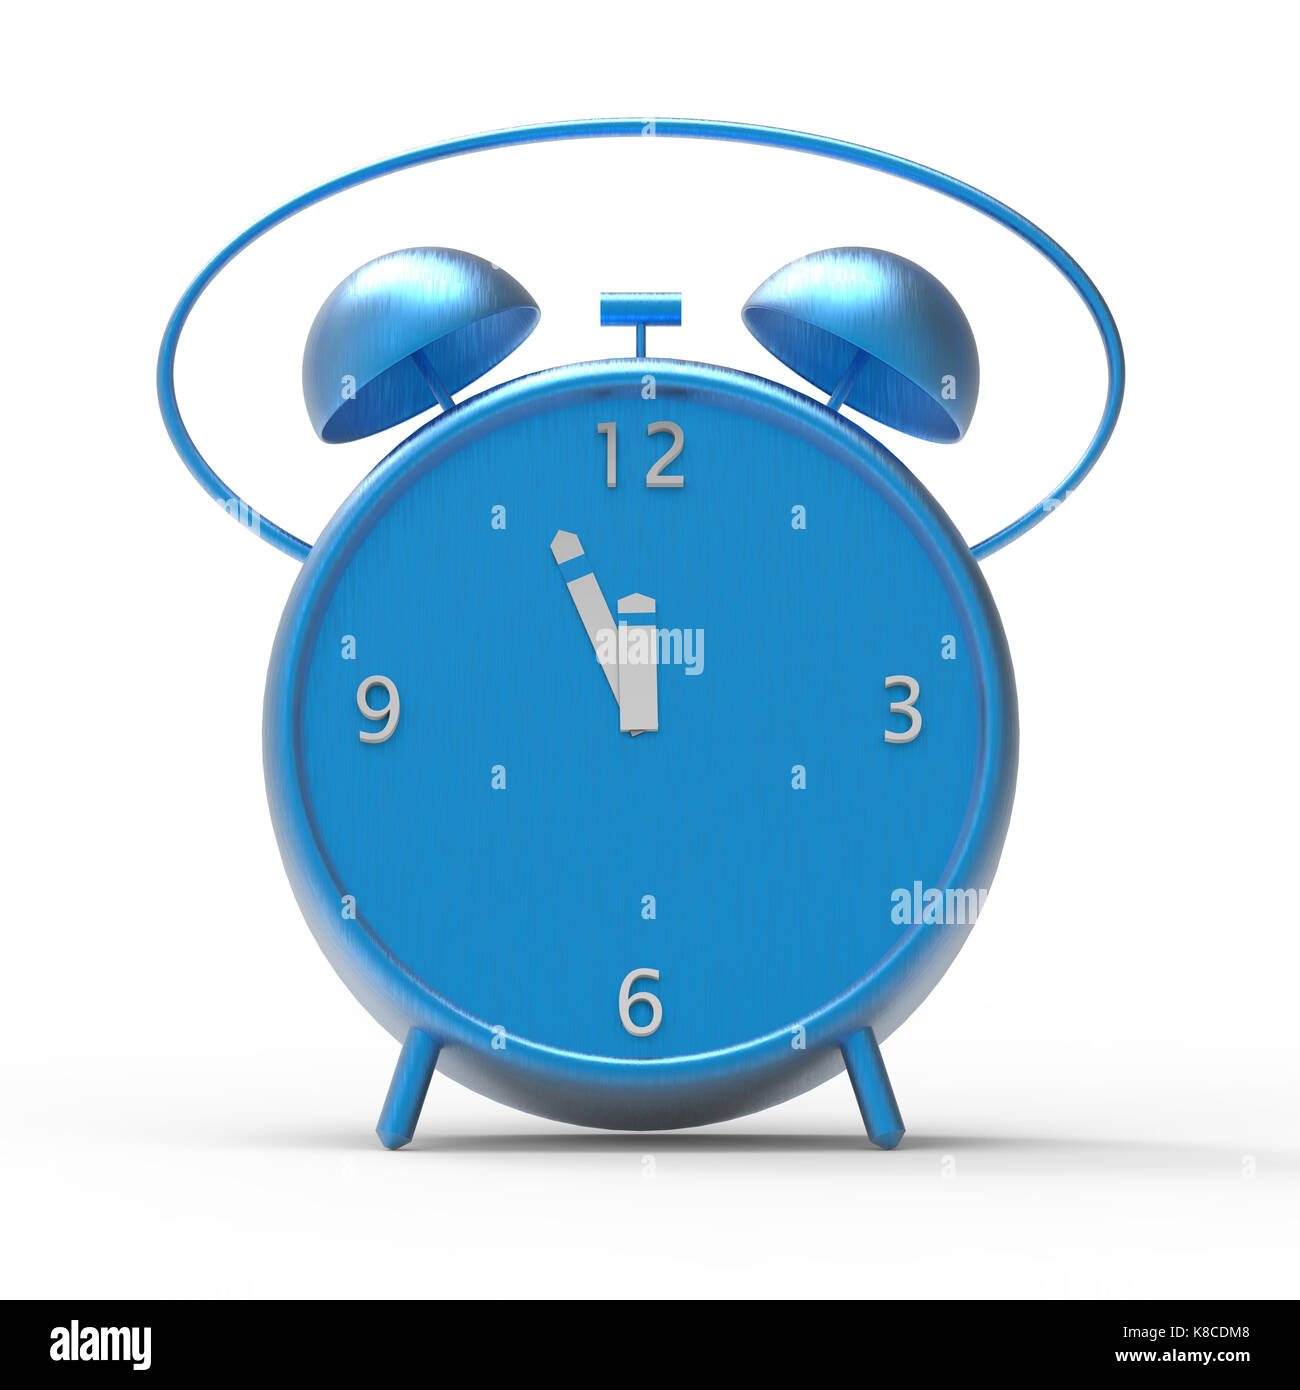 The alarm clock with little minutes to twelve o'clock Stock Photo